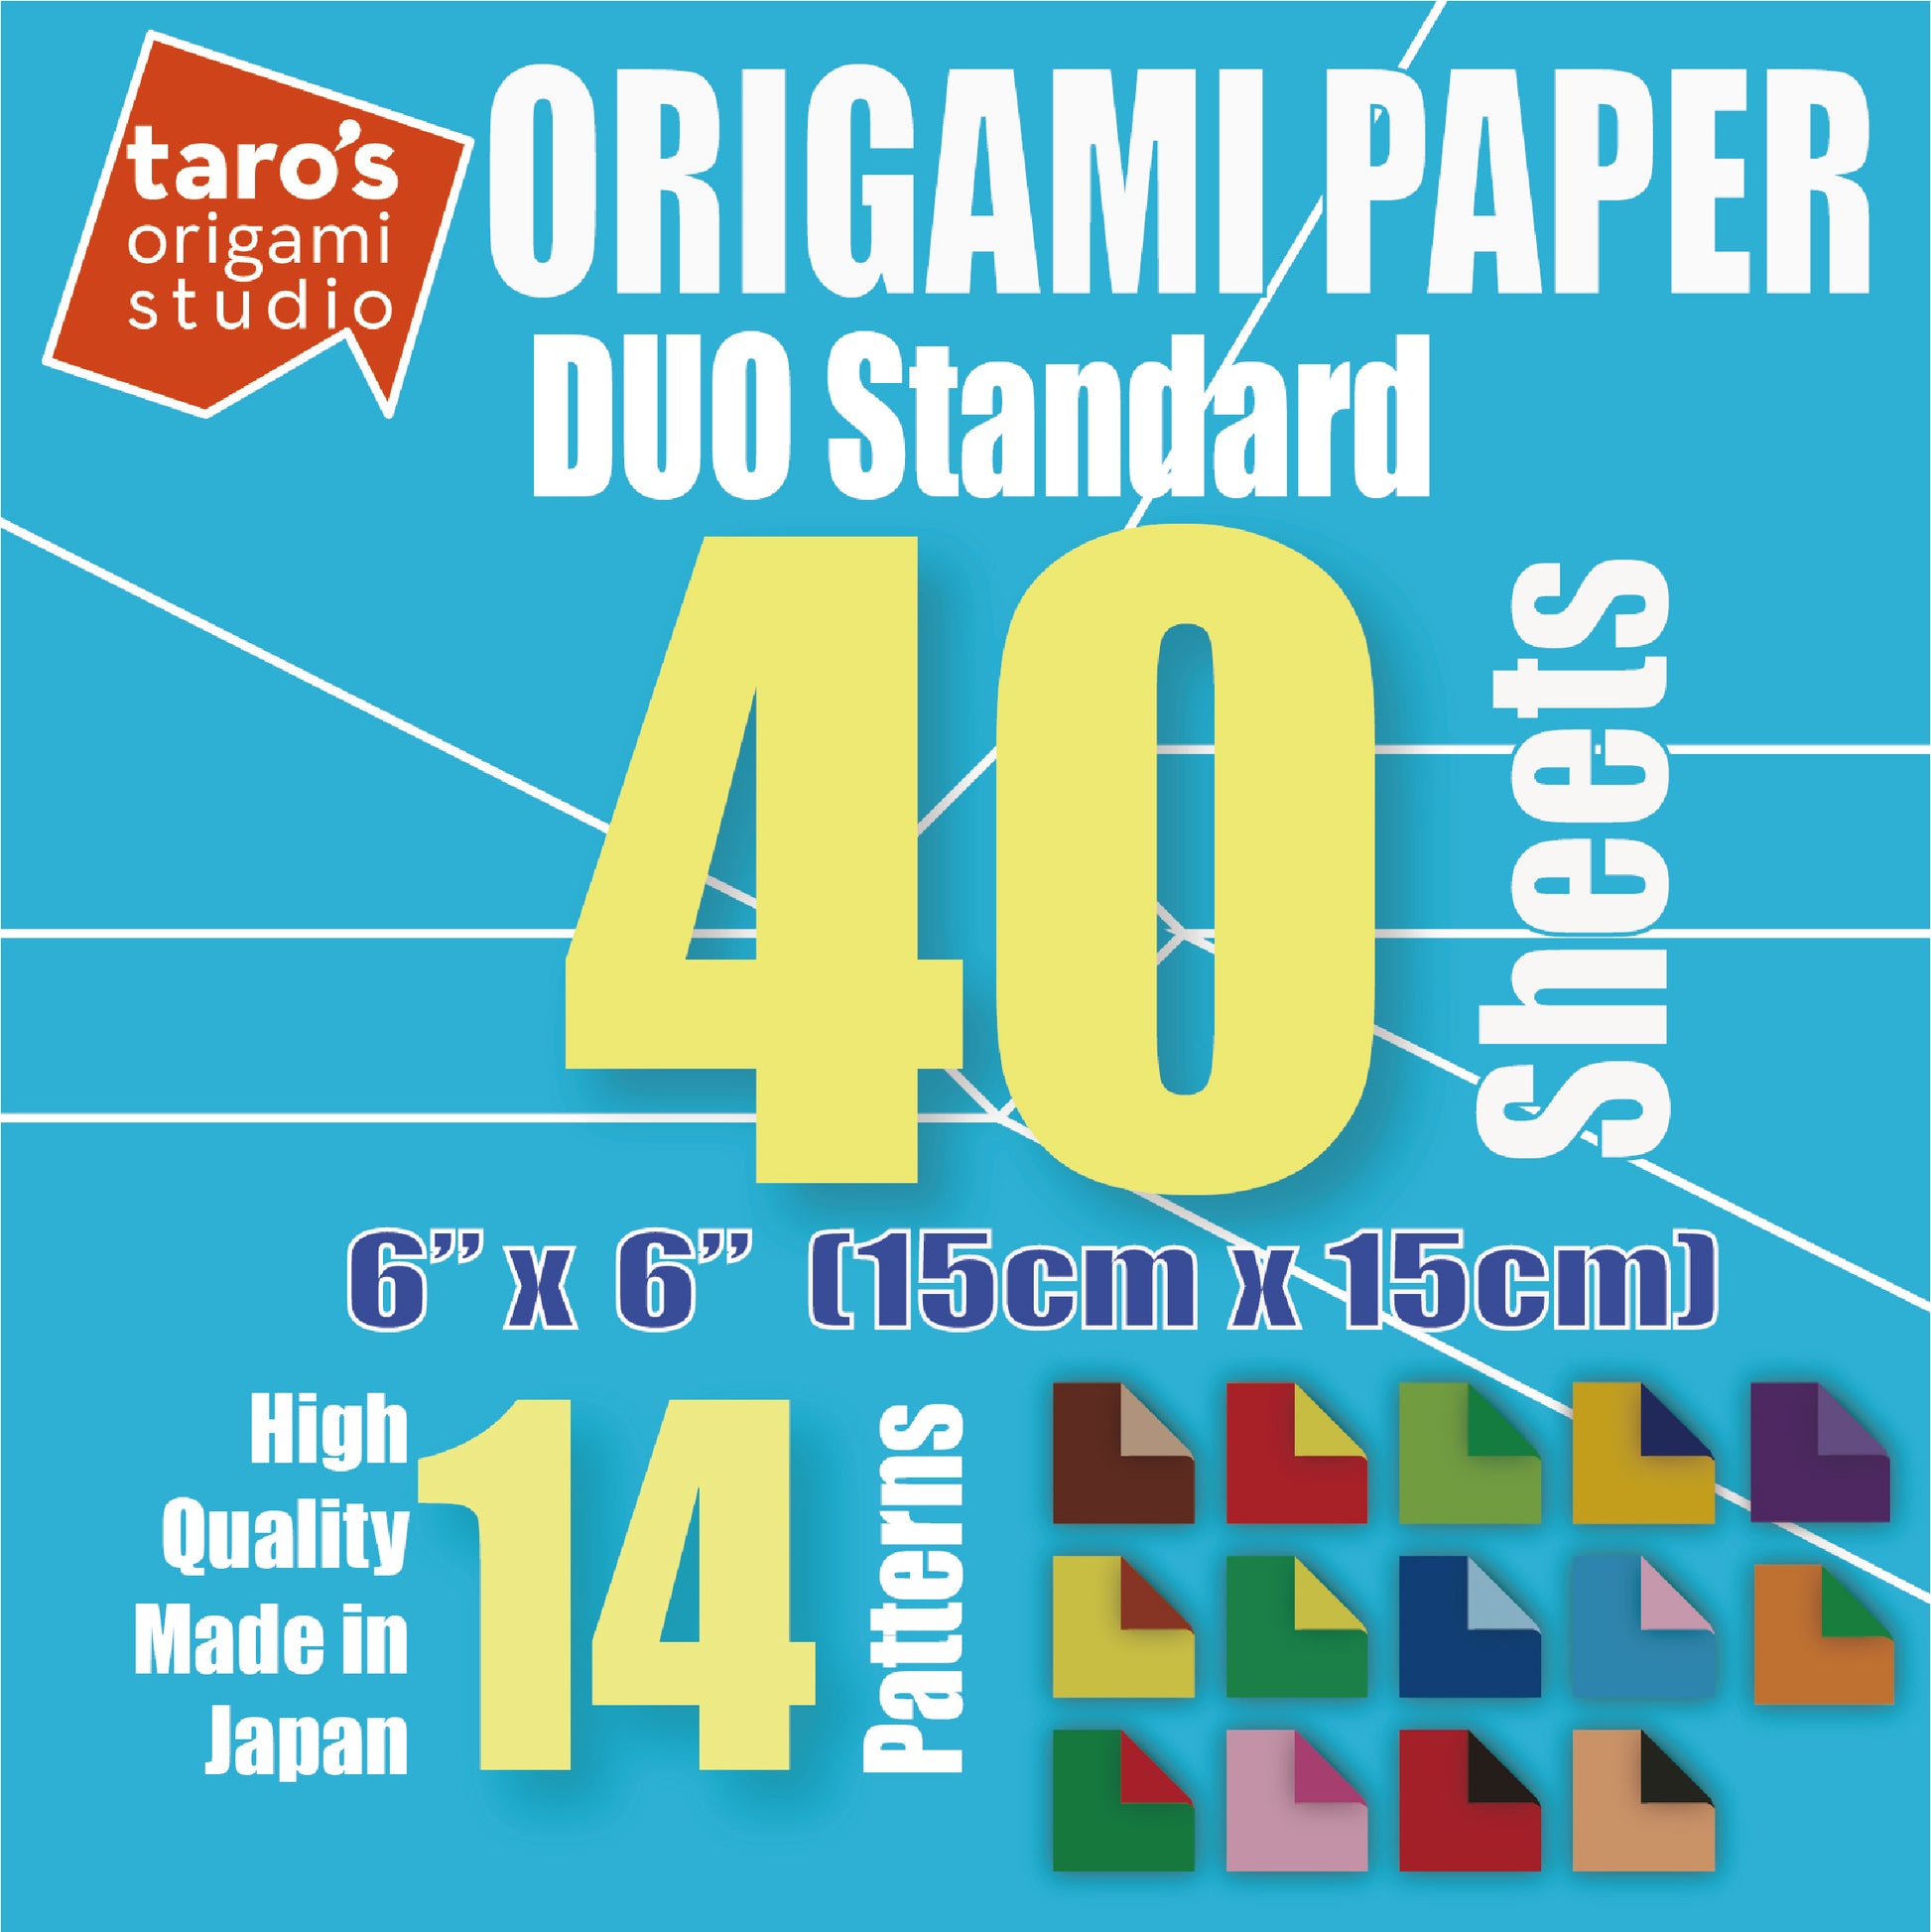 Taro's Origami Studio] Large Duo (Different Colors On Each Side) Double  Sided Standard 9.5 Inch (24 cm) Kami Paper with 14 Color Change Patterns,  20 Sheets (Made in Japan) - Taro's Origami